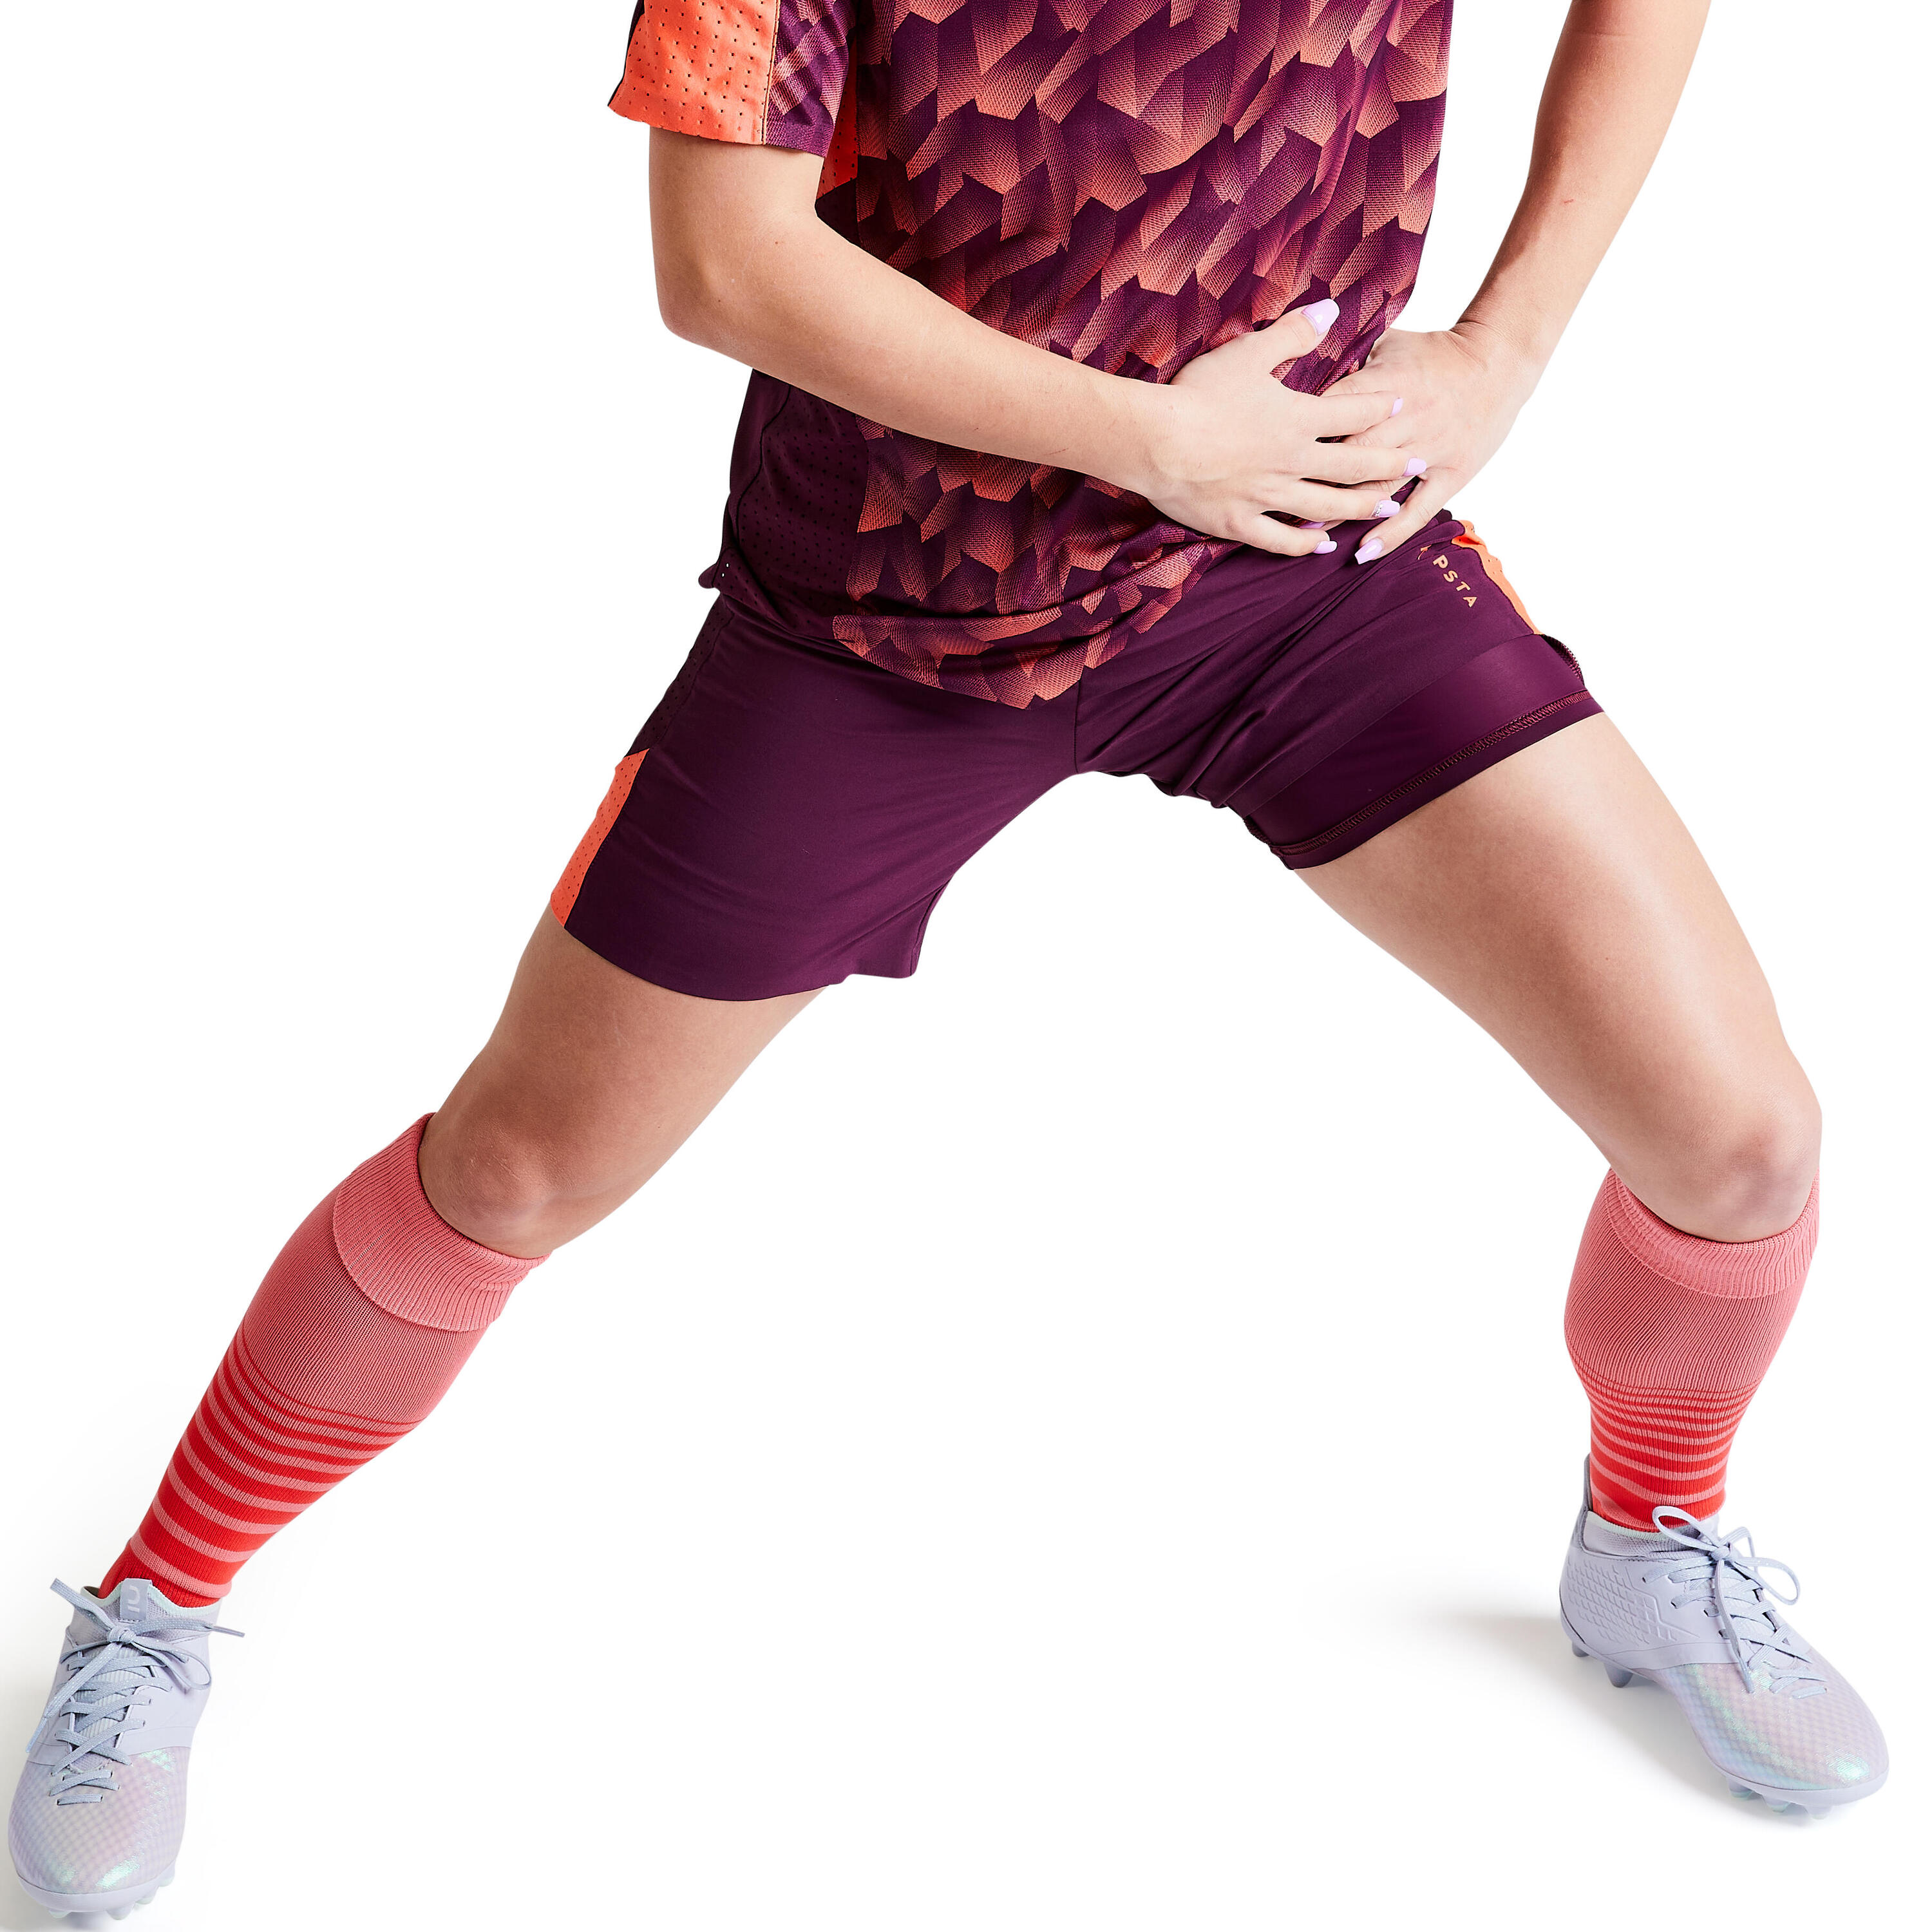 Women's Football Jersey F900 - Coral 21/31